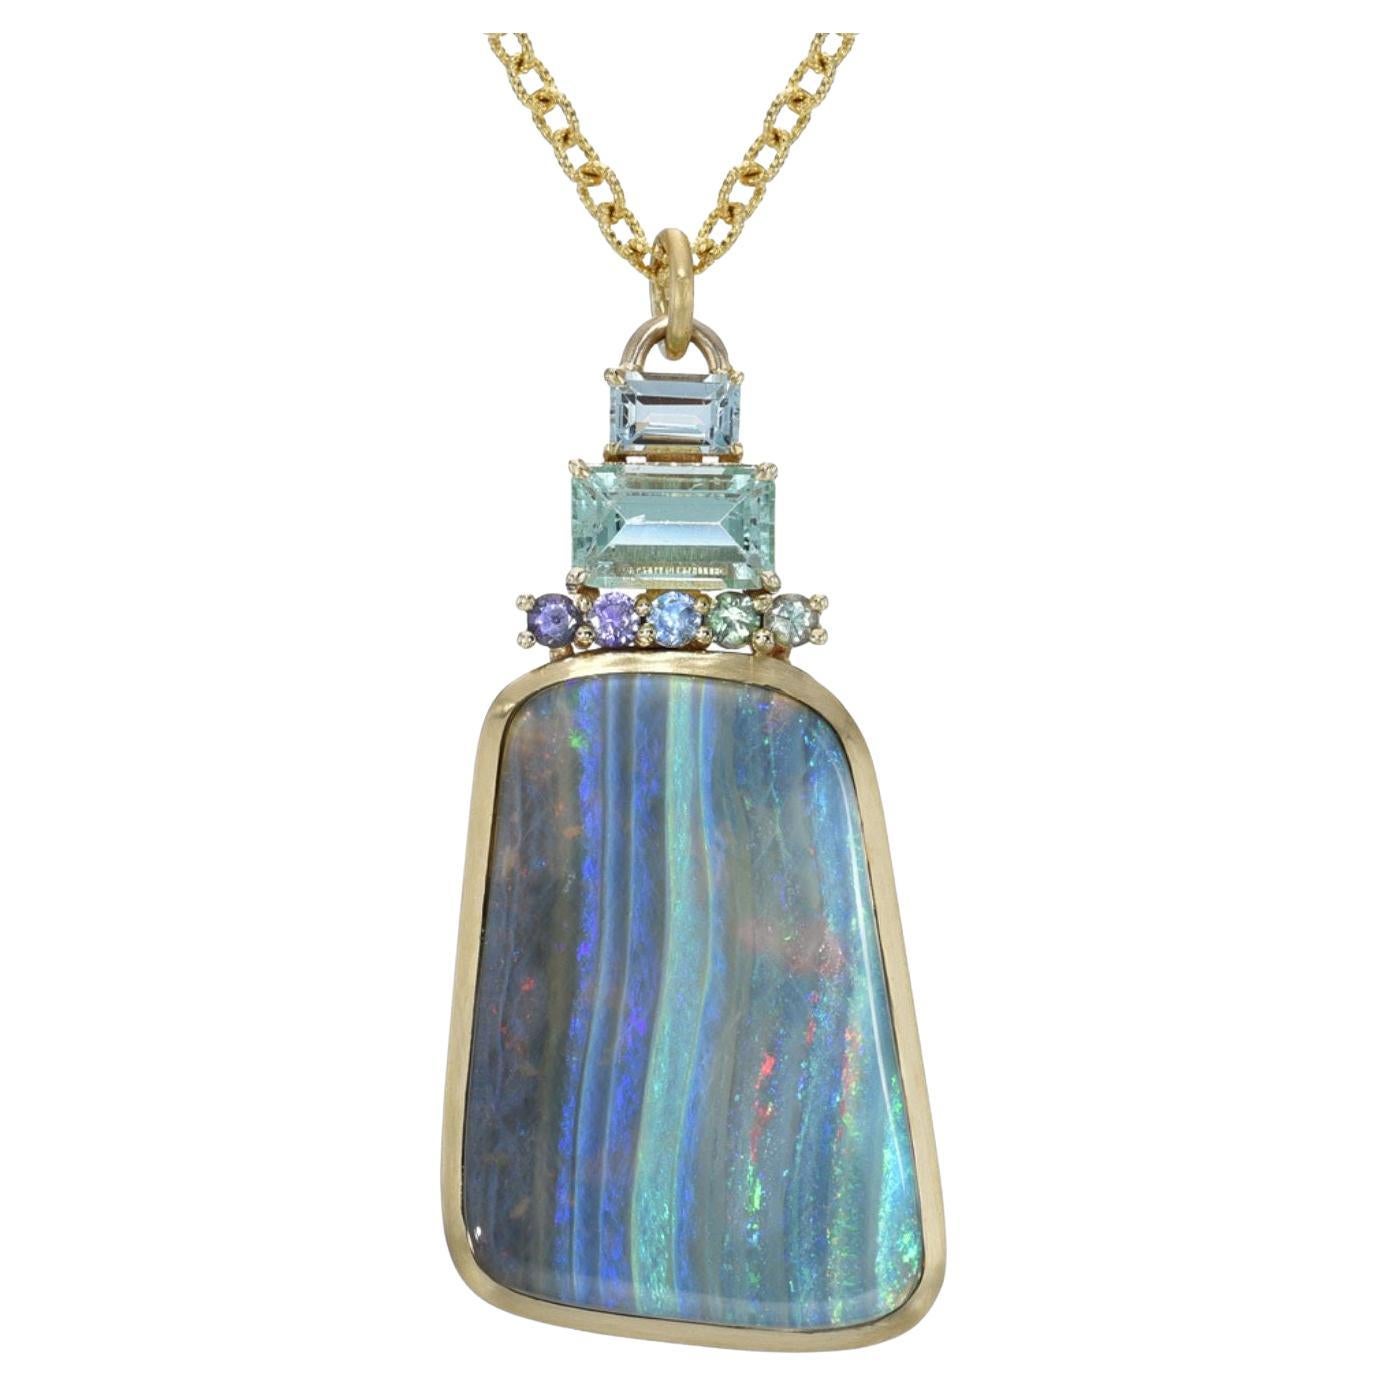 NIXIN Jewelry Eucalyptus Melody Australian Opal Necklace with Emerald and Gold